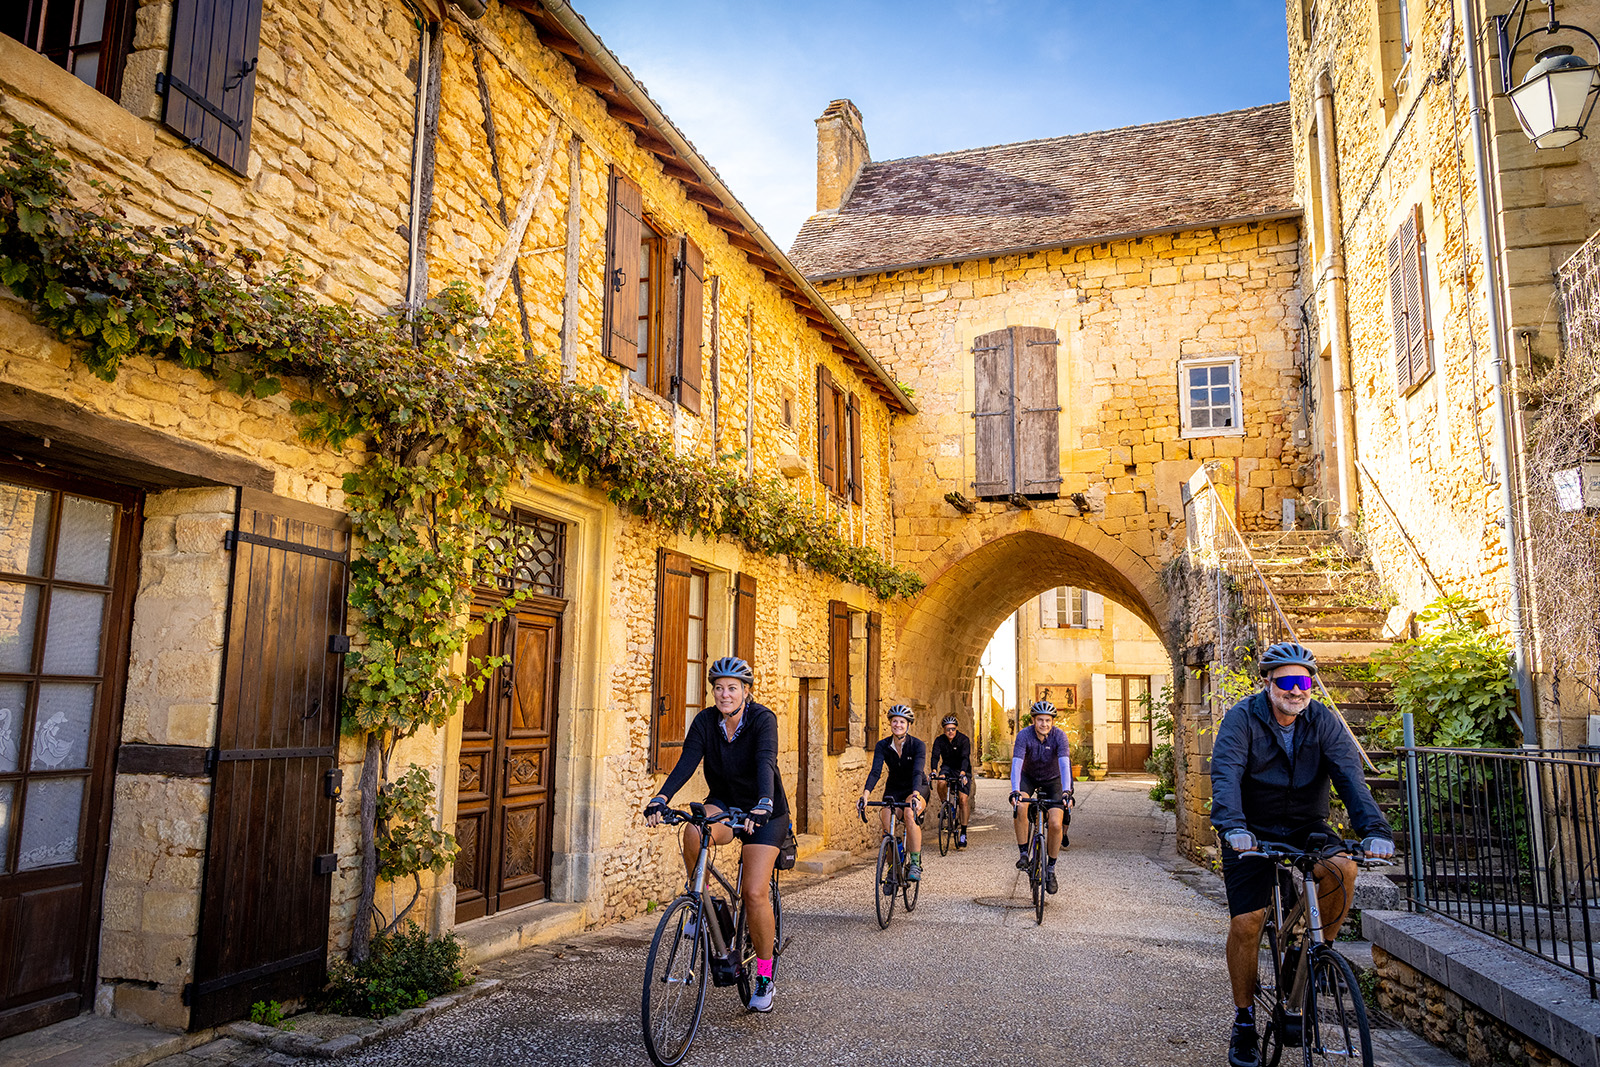 Bikers going through a town of stone buildings